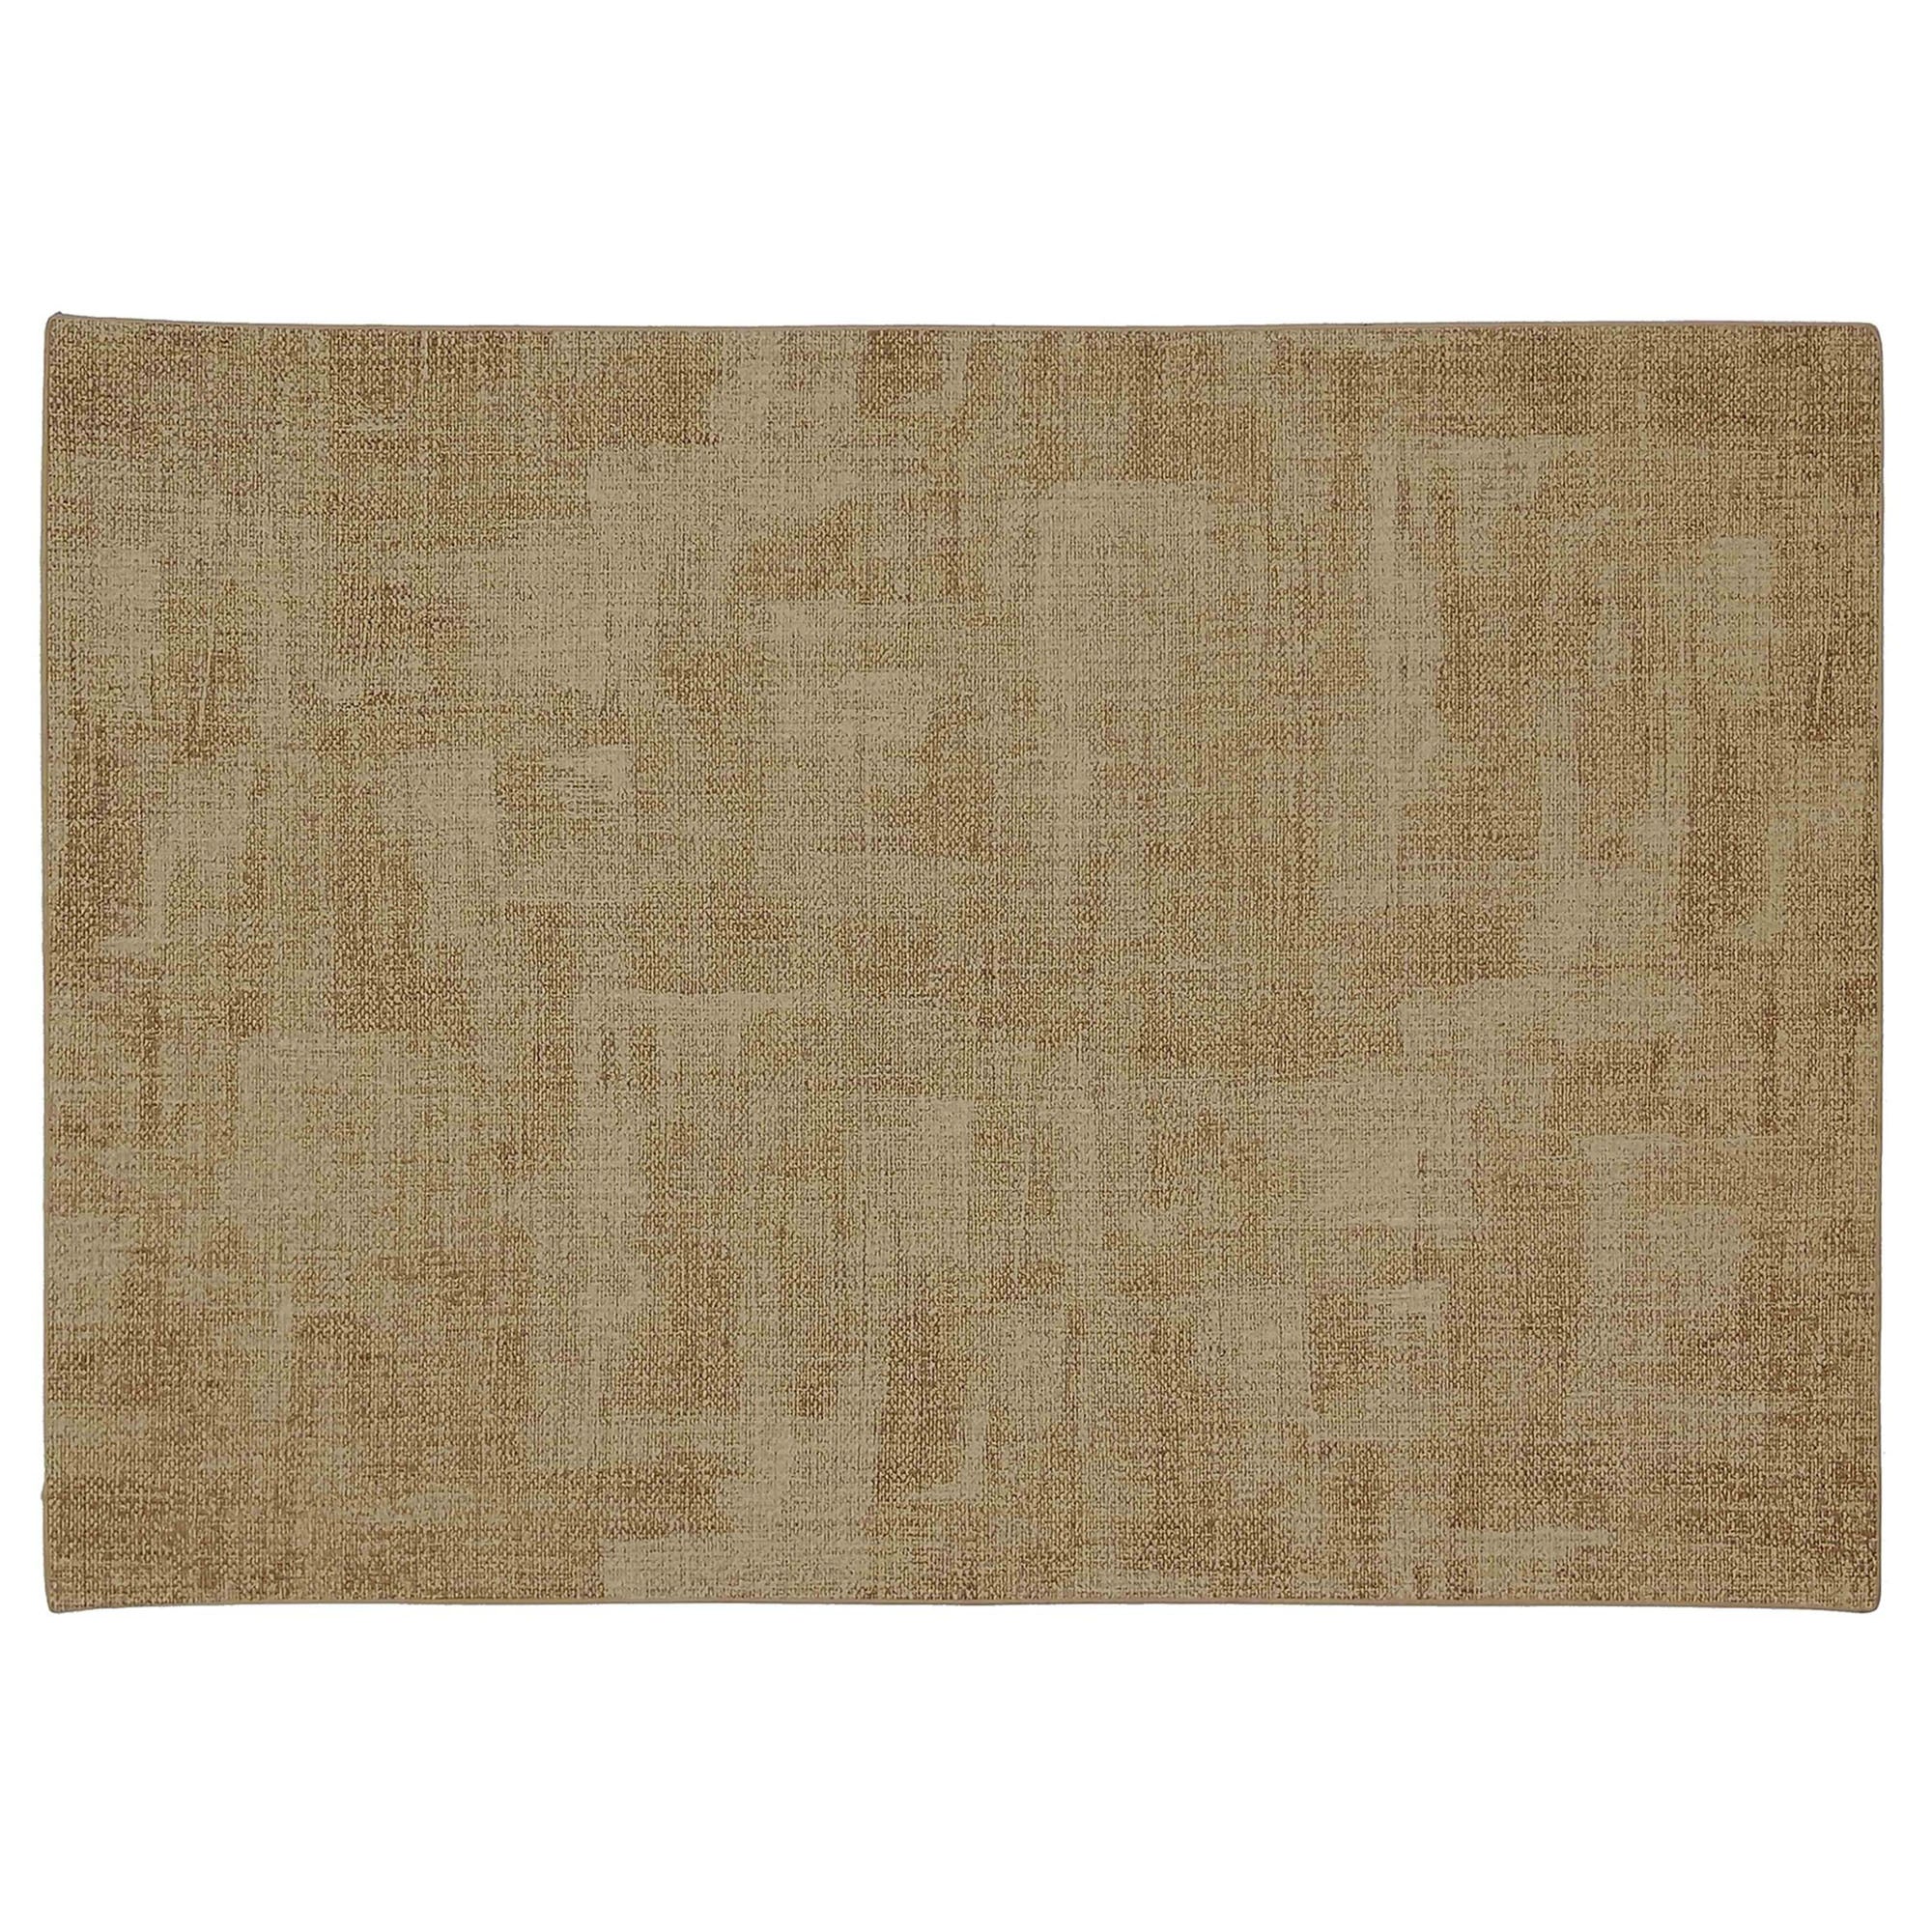 Heavy Suede Look Textaline Taupe Placemat 17x11.75in